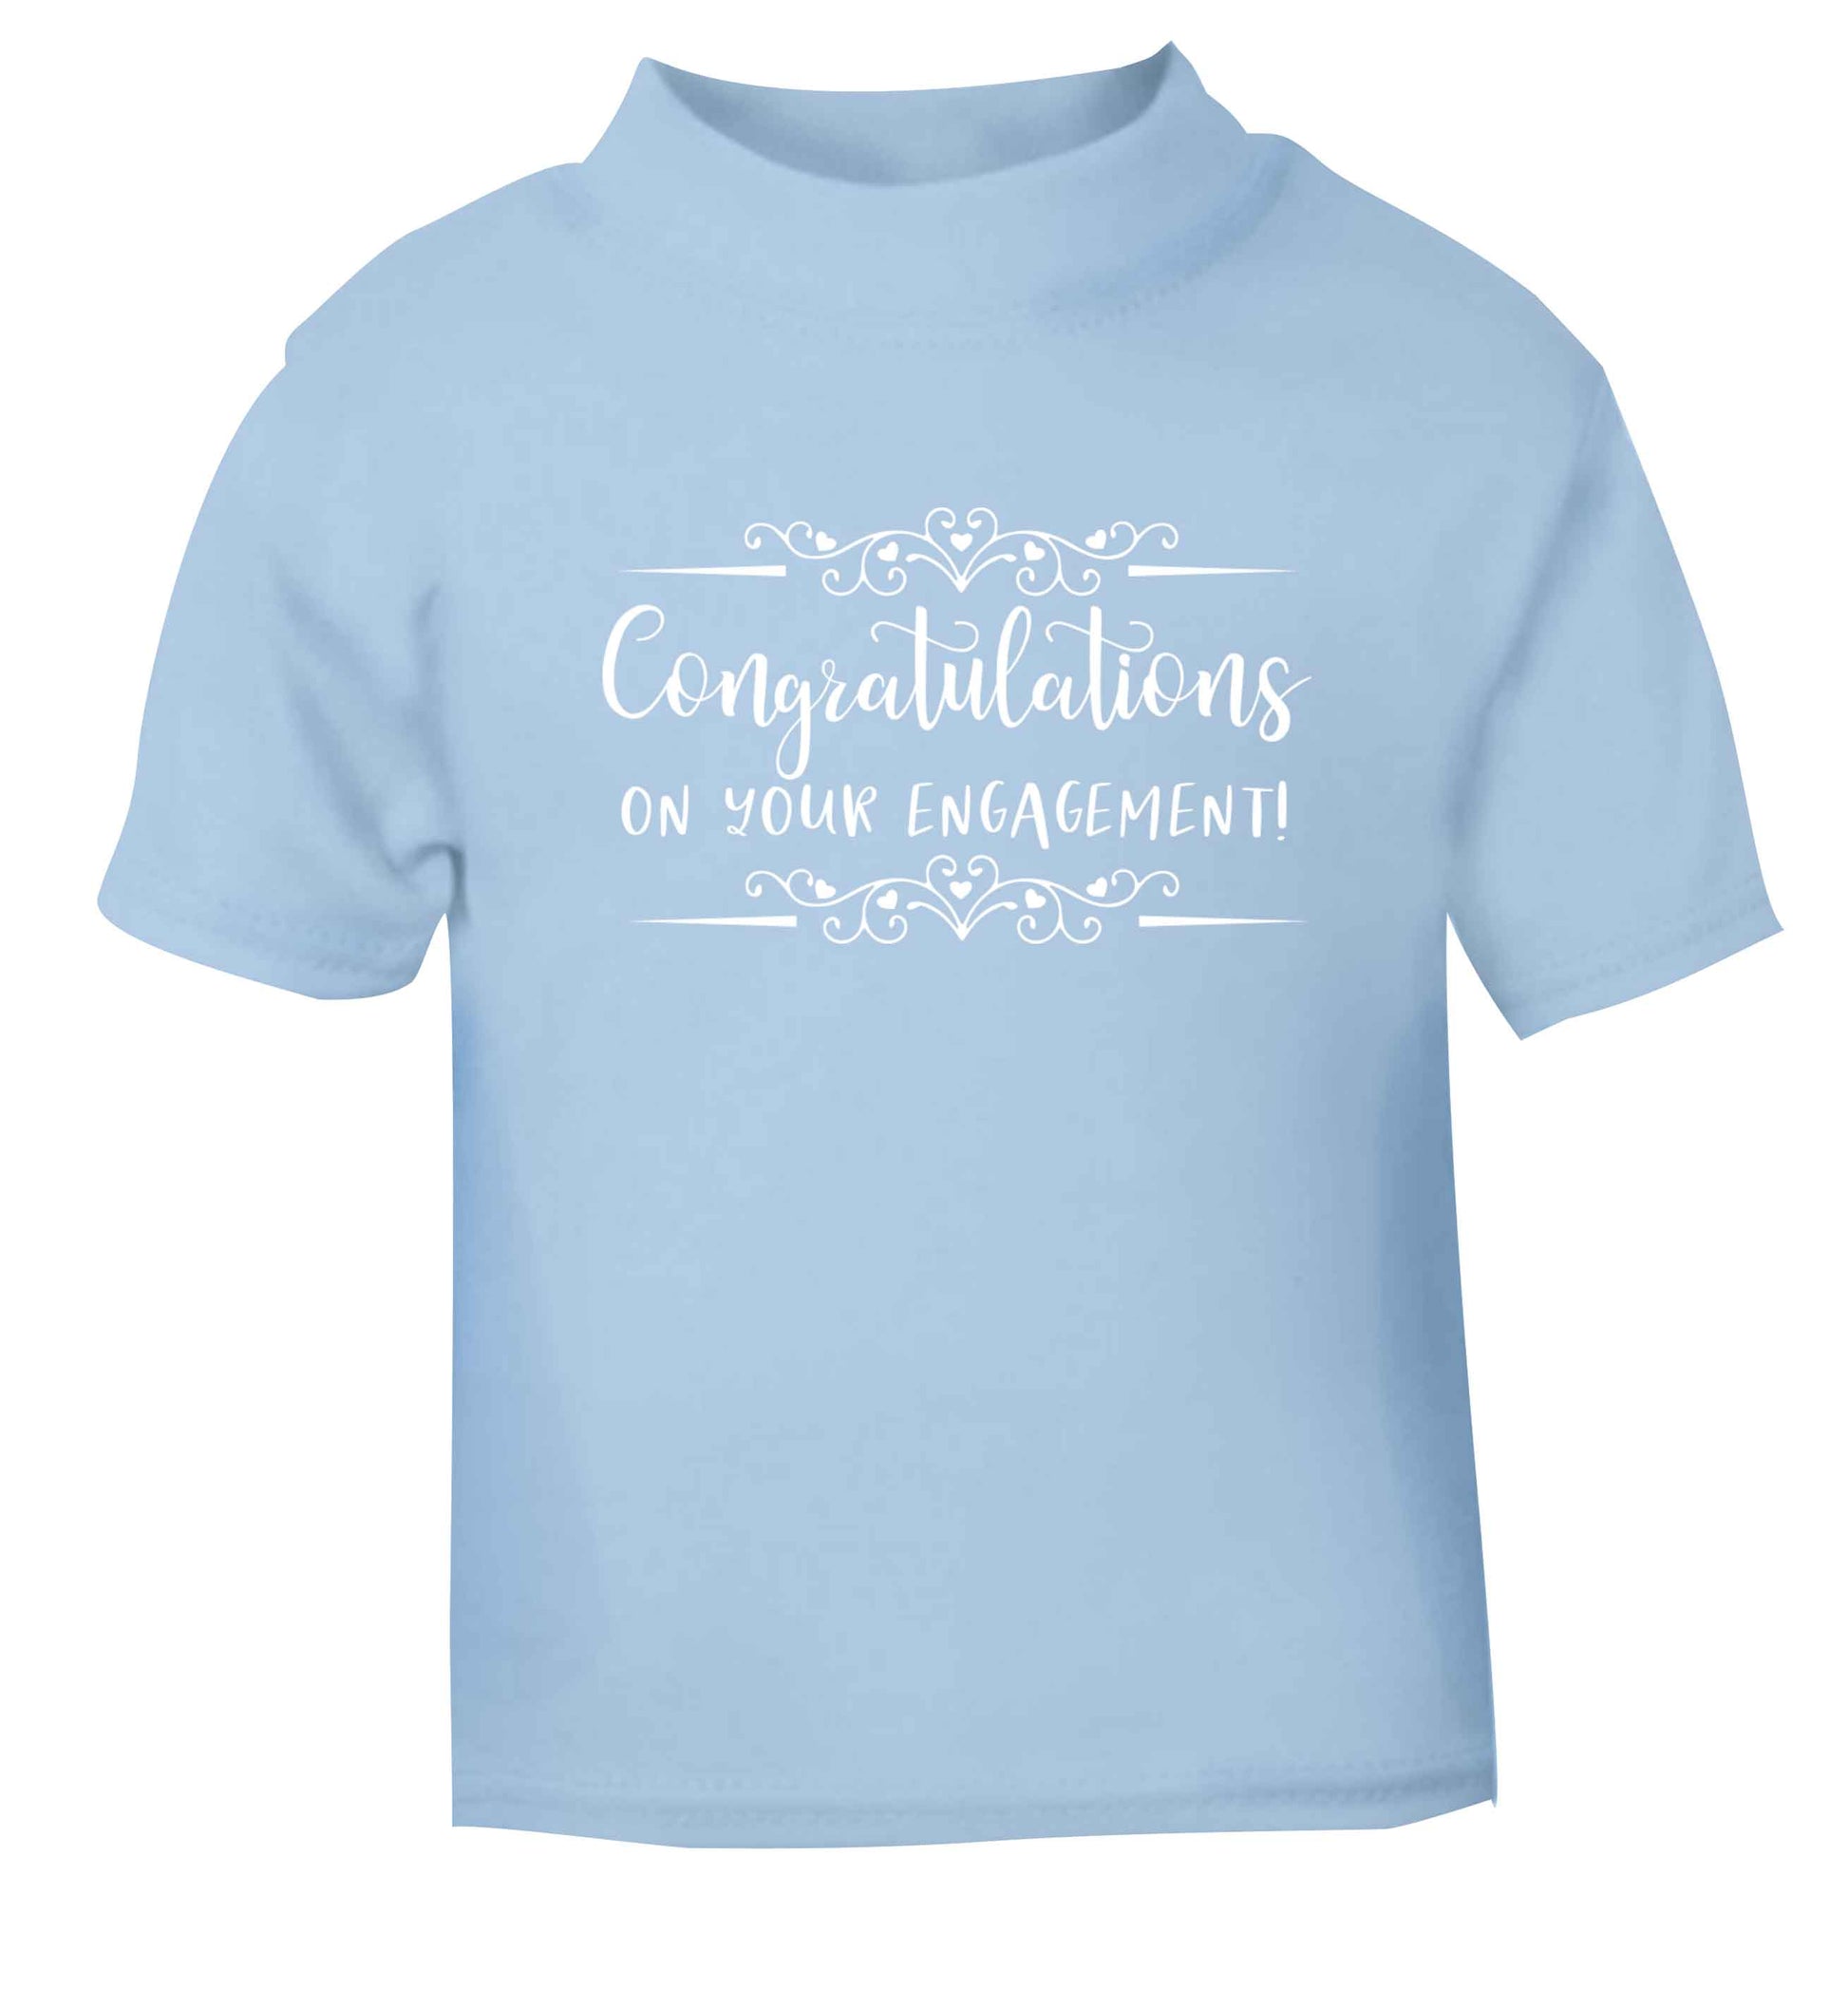 Congratulations on your engagement light blue baby toddler Tshirt 2 Years